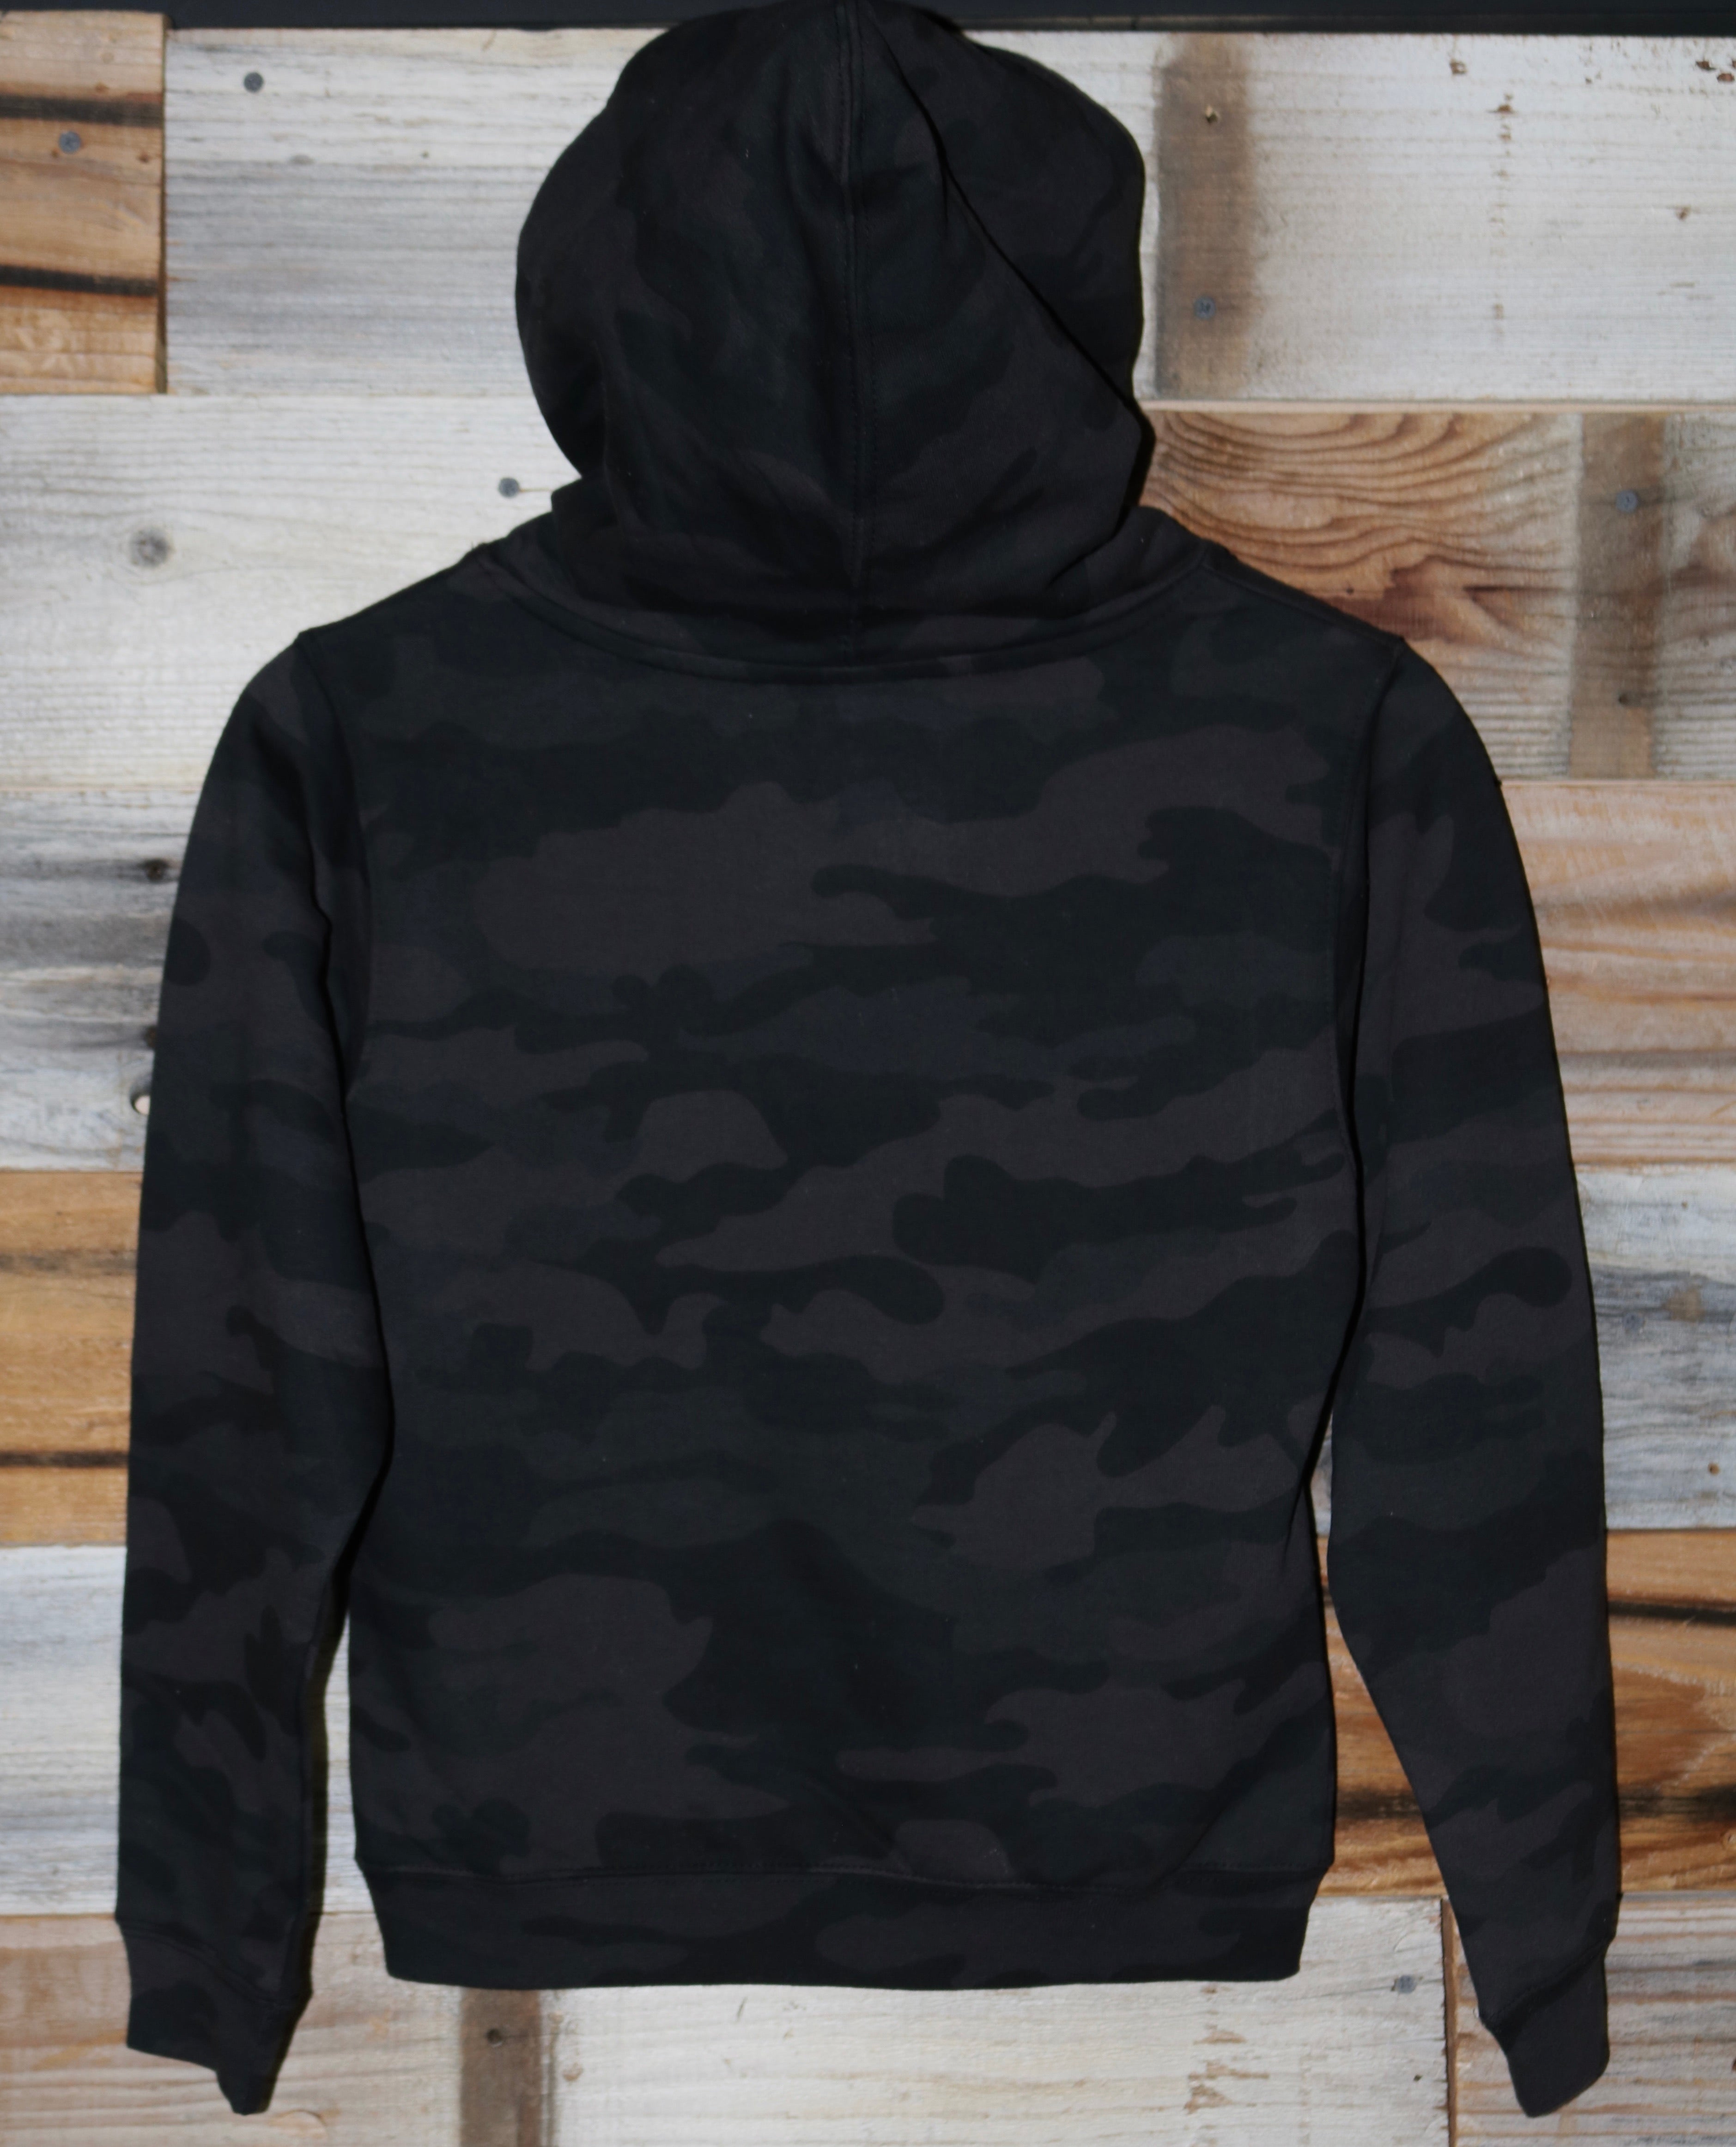 Youth Black Camo Embroidered Dirt Surfer Hoodie